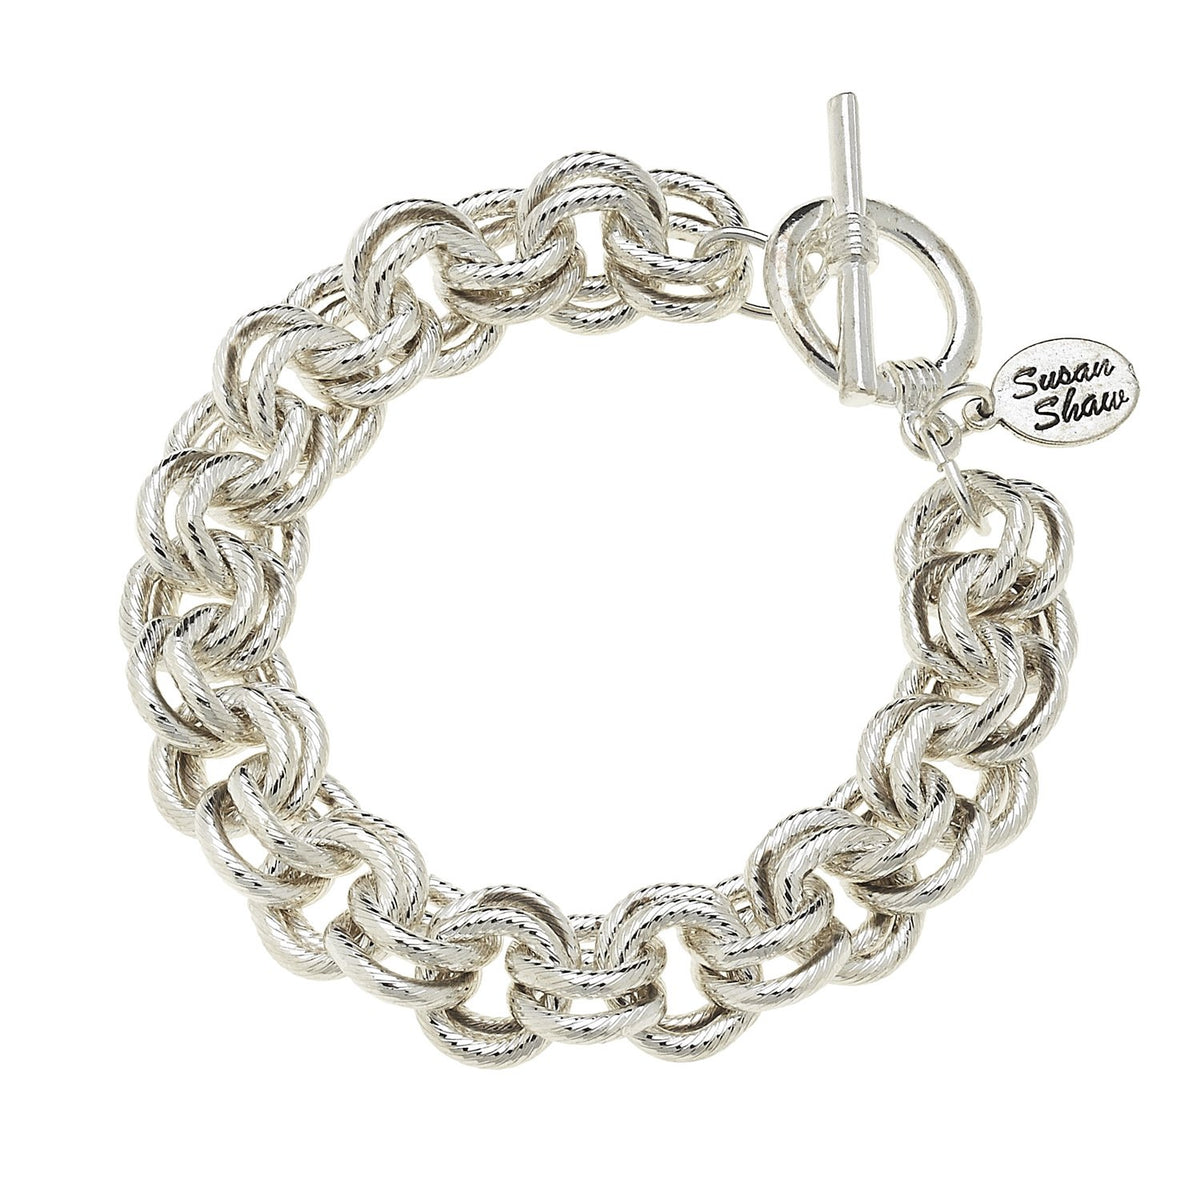 Double Layer Link Chain Bracelet in Silver or Gold | Buy Online Fashion  Jewellery Australia - Fashionably Yours Bridal & Formal Sydney